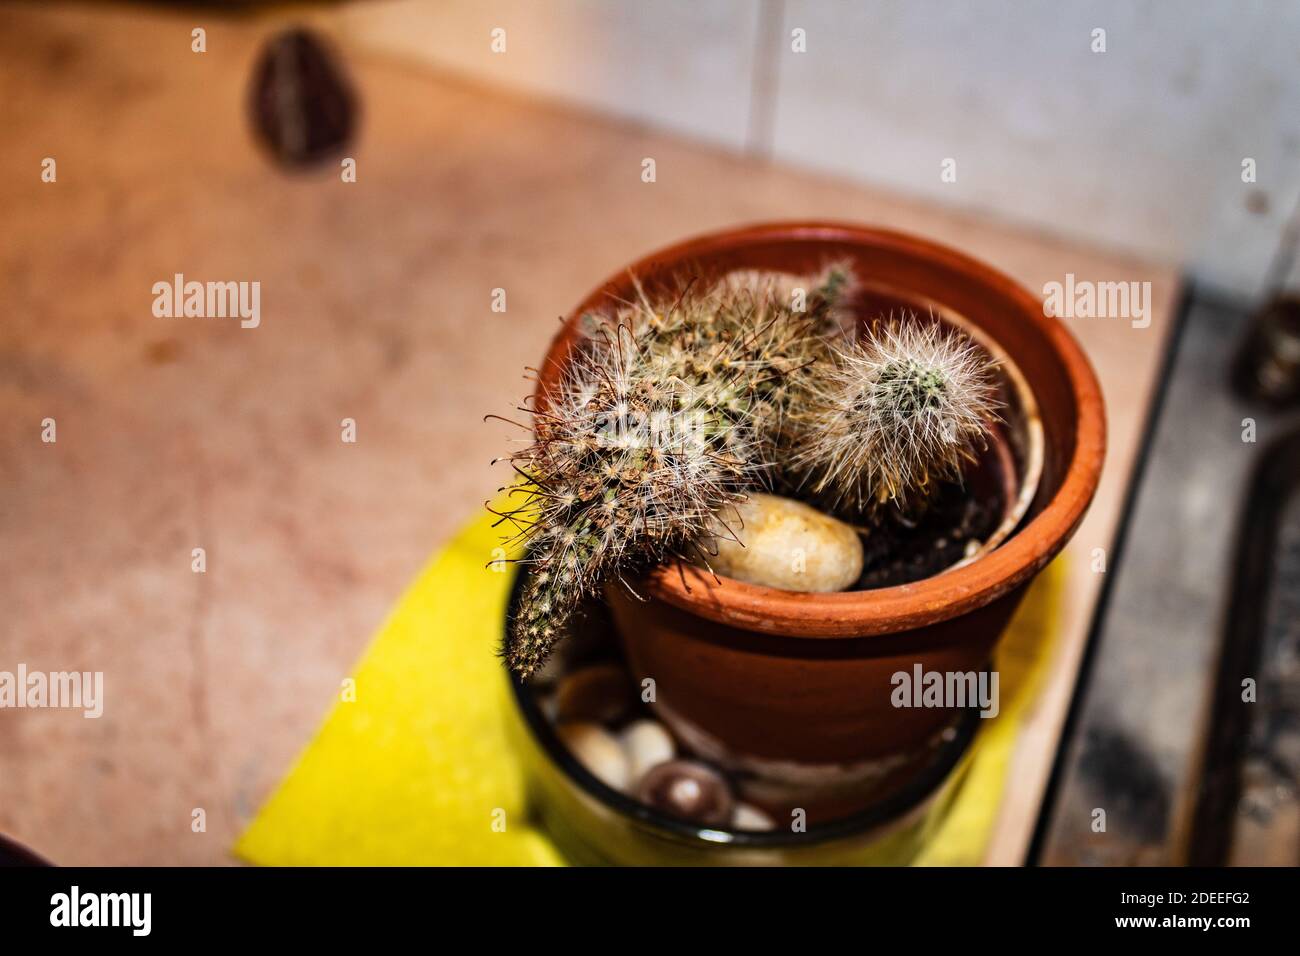 Small cactus in a small pot Stock Photo